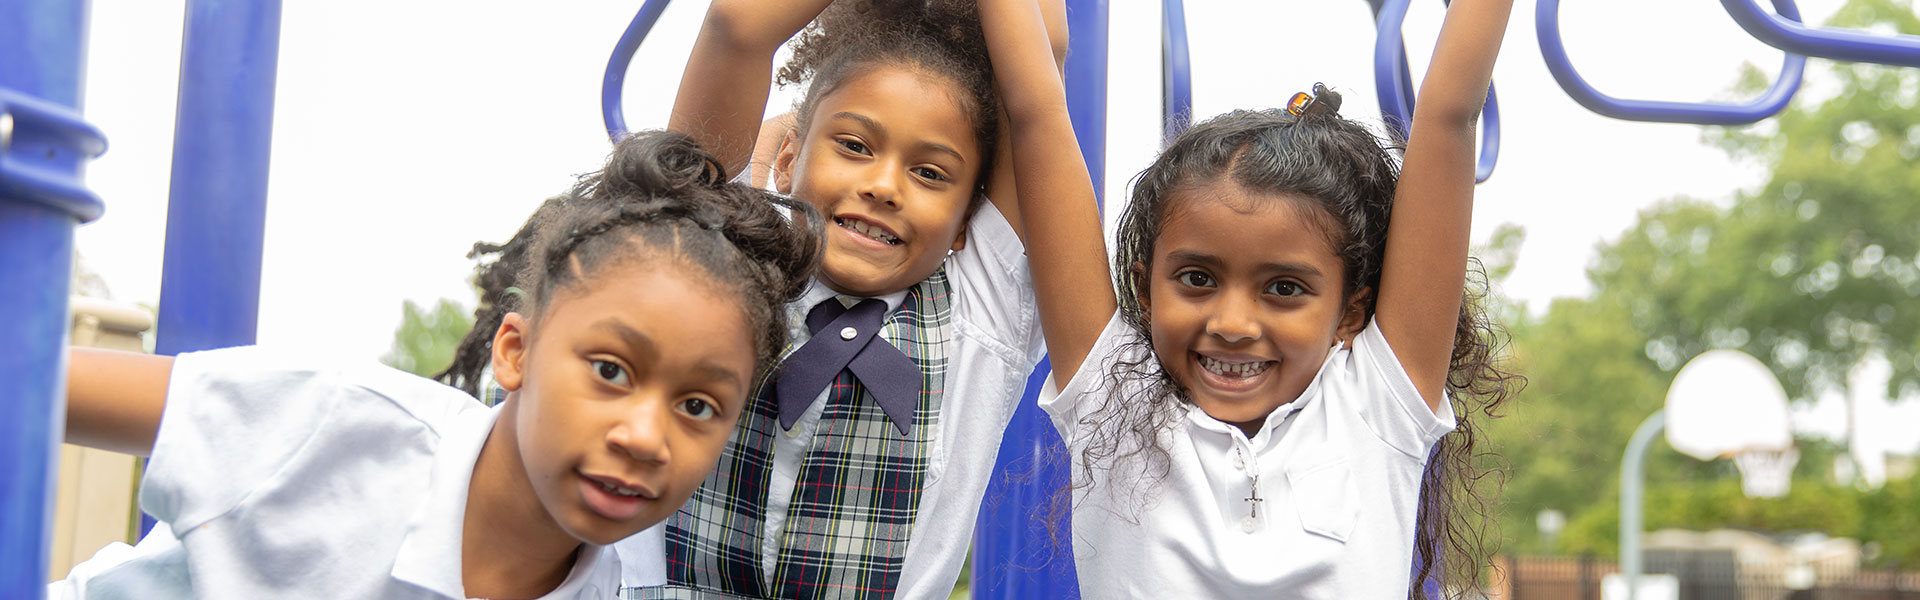 girl students on playground at annunciation catholic school in washington, dc